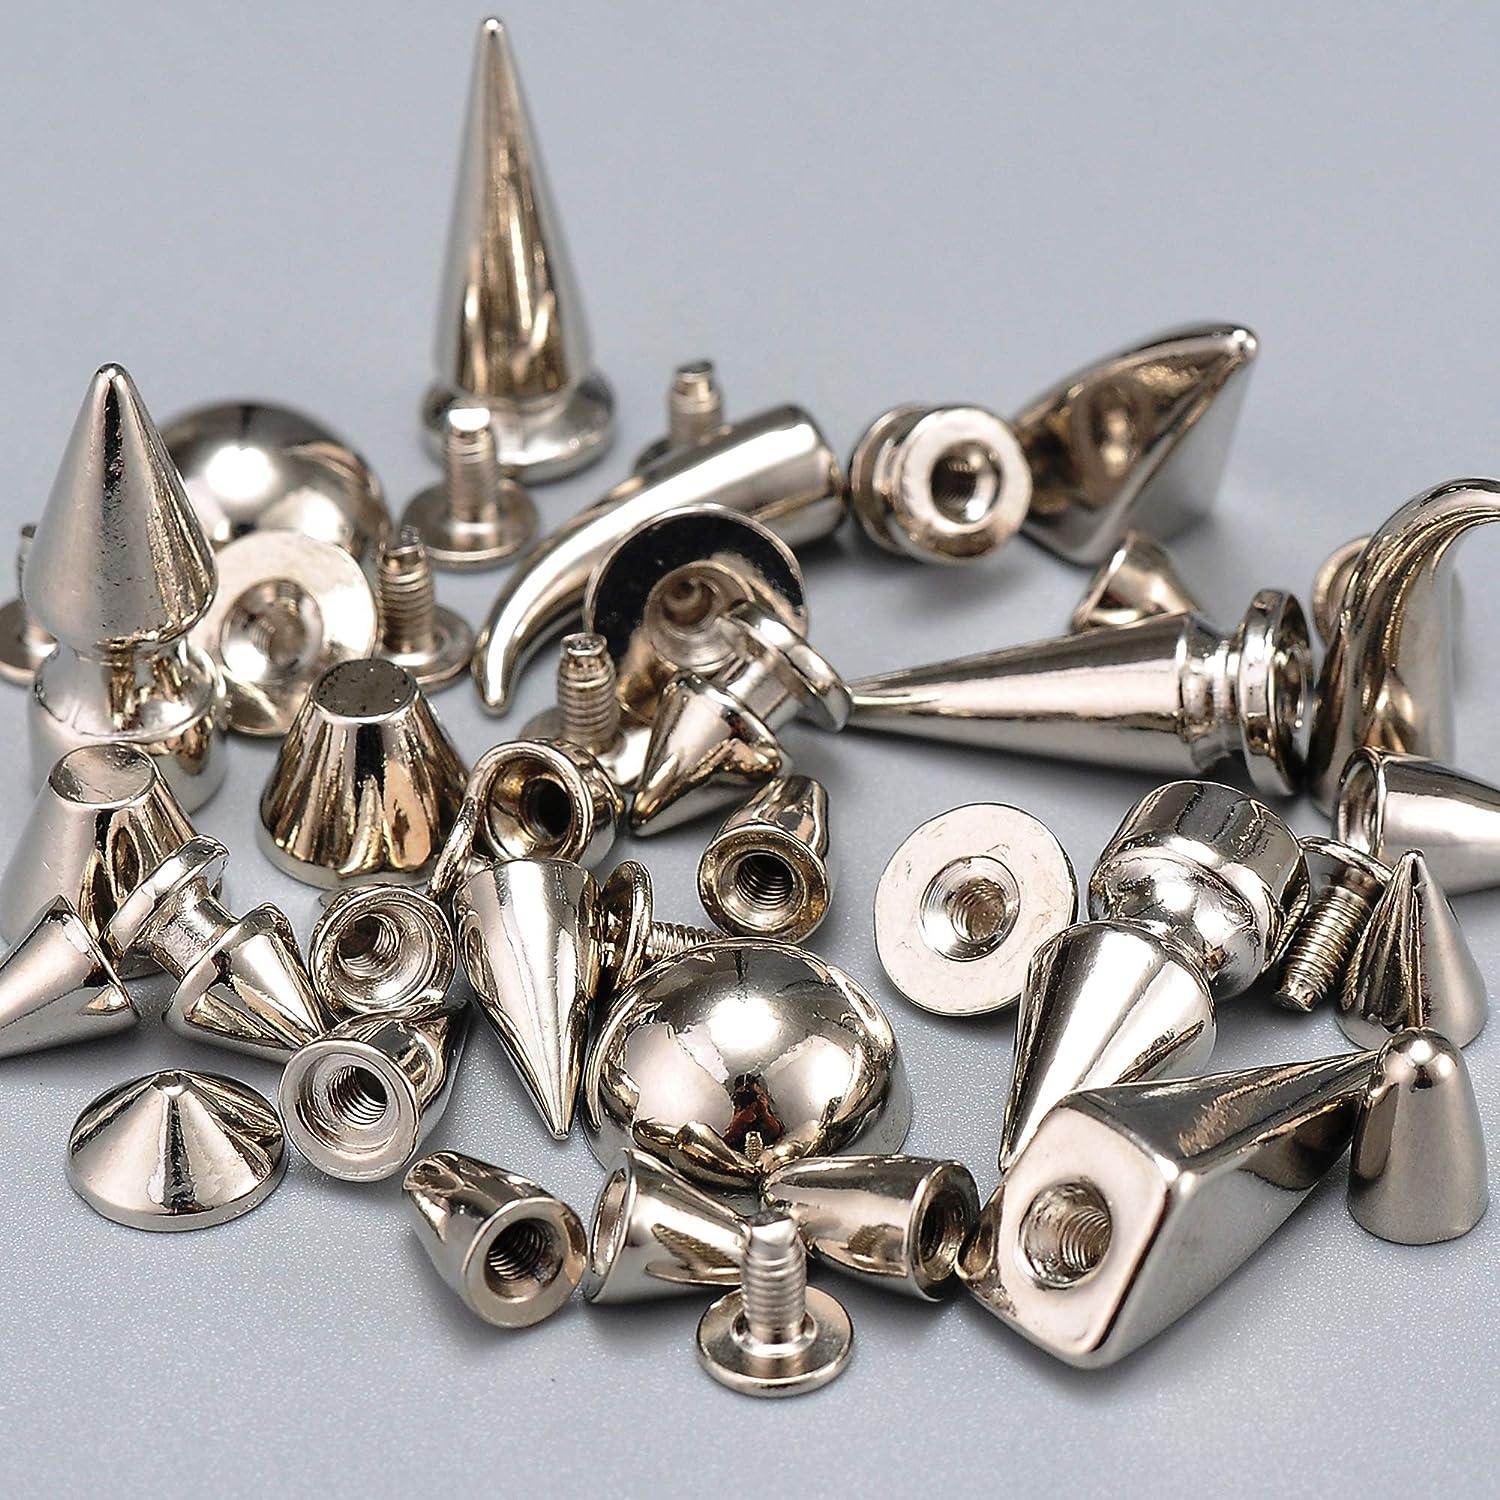 YORANYO 270 Sets Mixed Shape Spikes and Studs Silver Color Screw